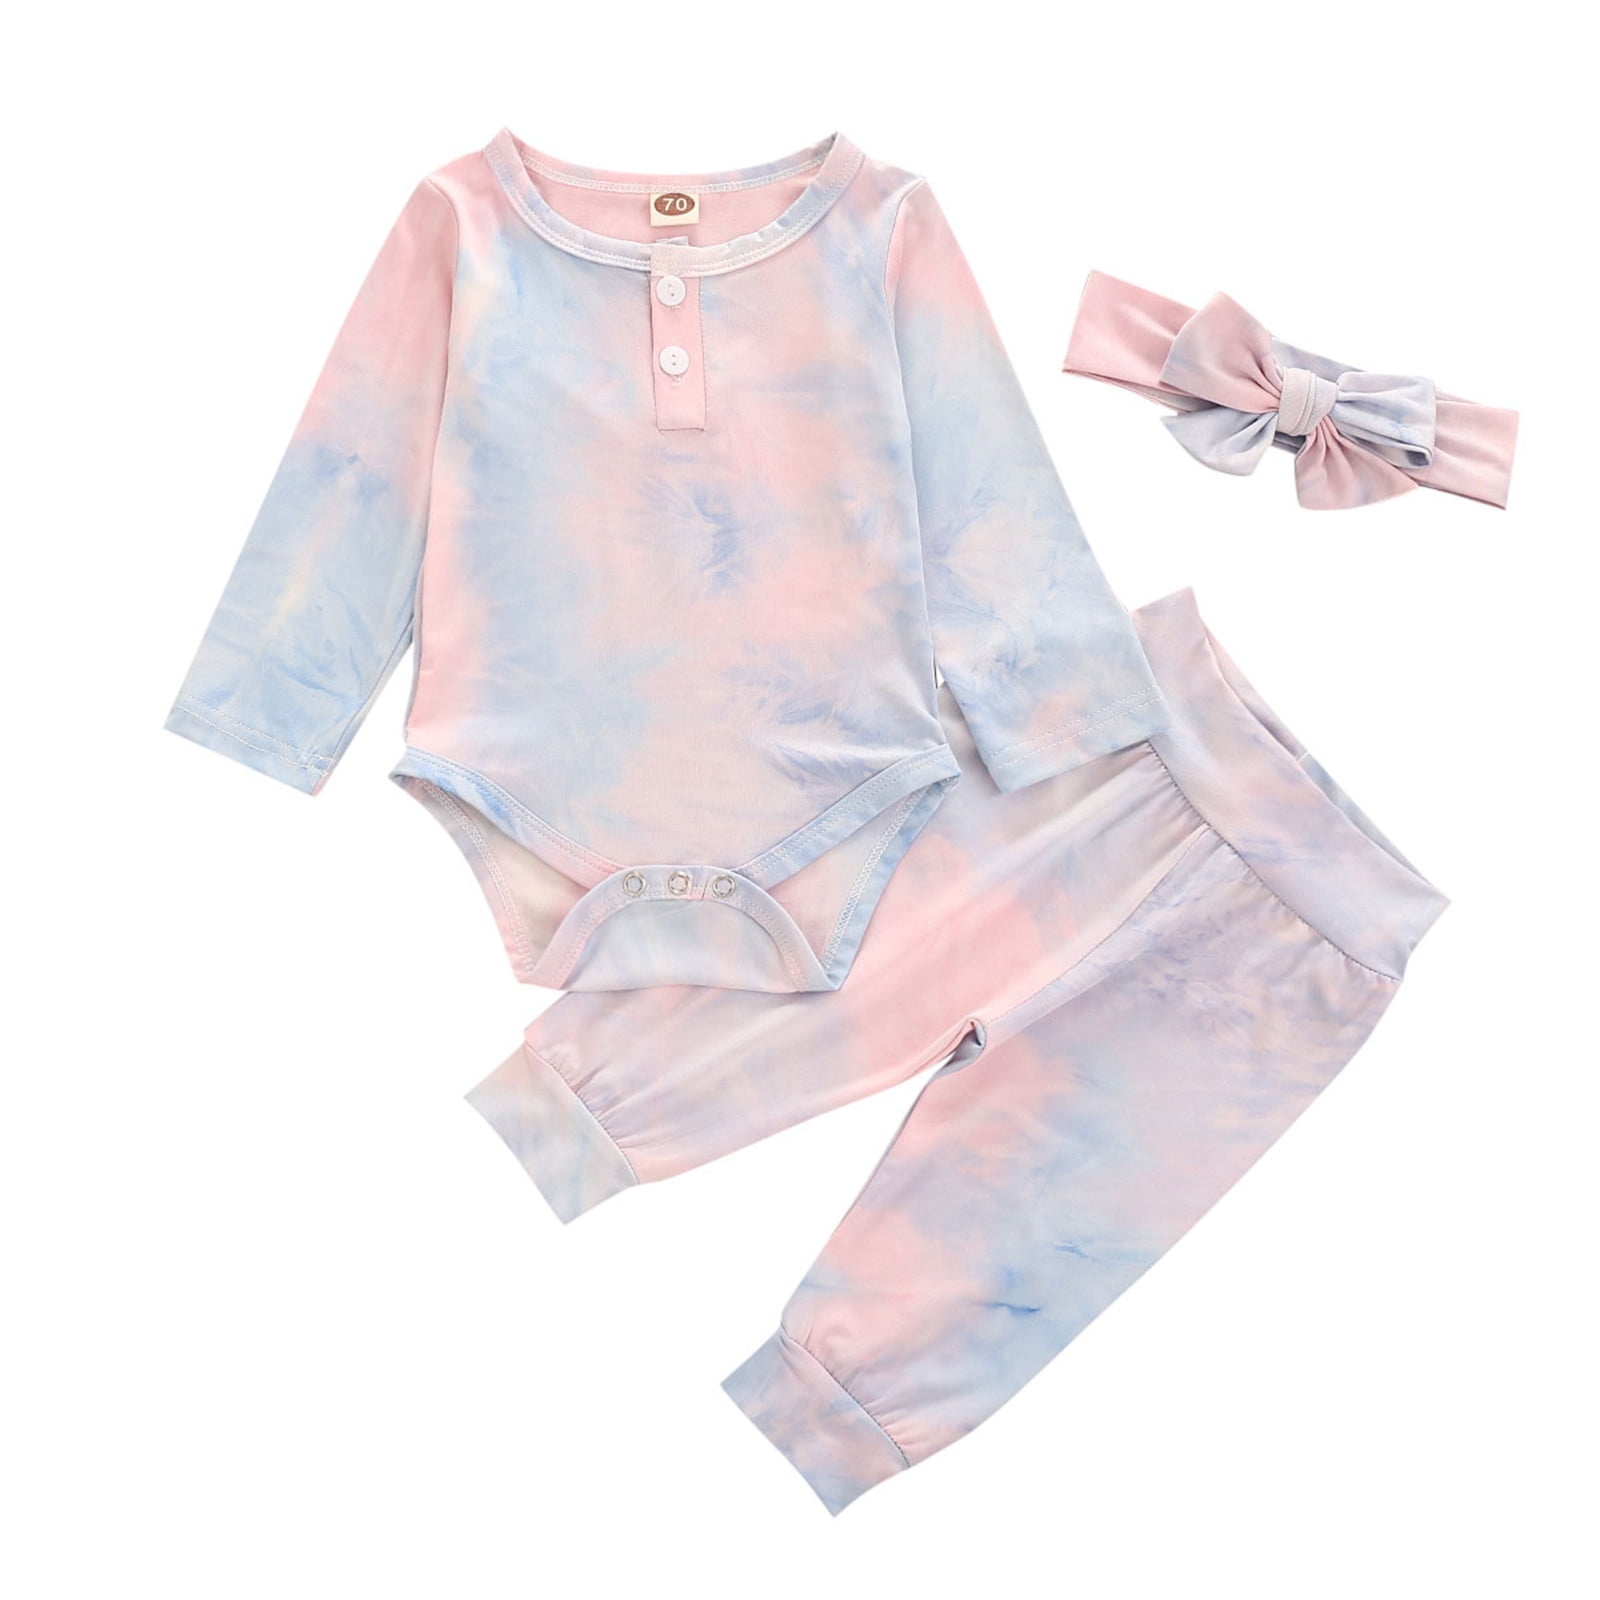 Baby Girls Rainbow Tie Dyed Romper Bodysuit And Pants Outfits Kids ...